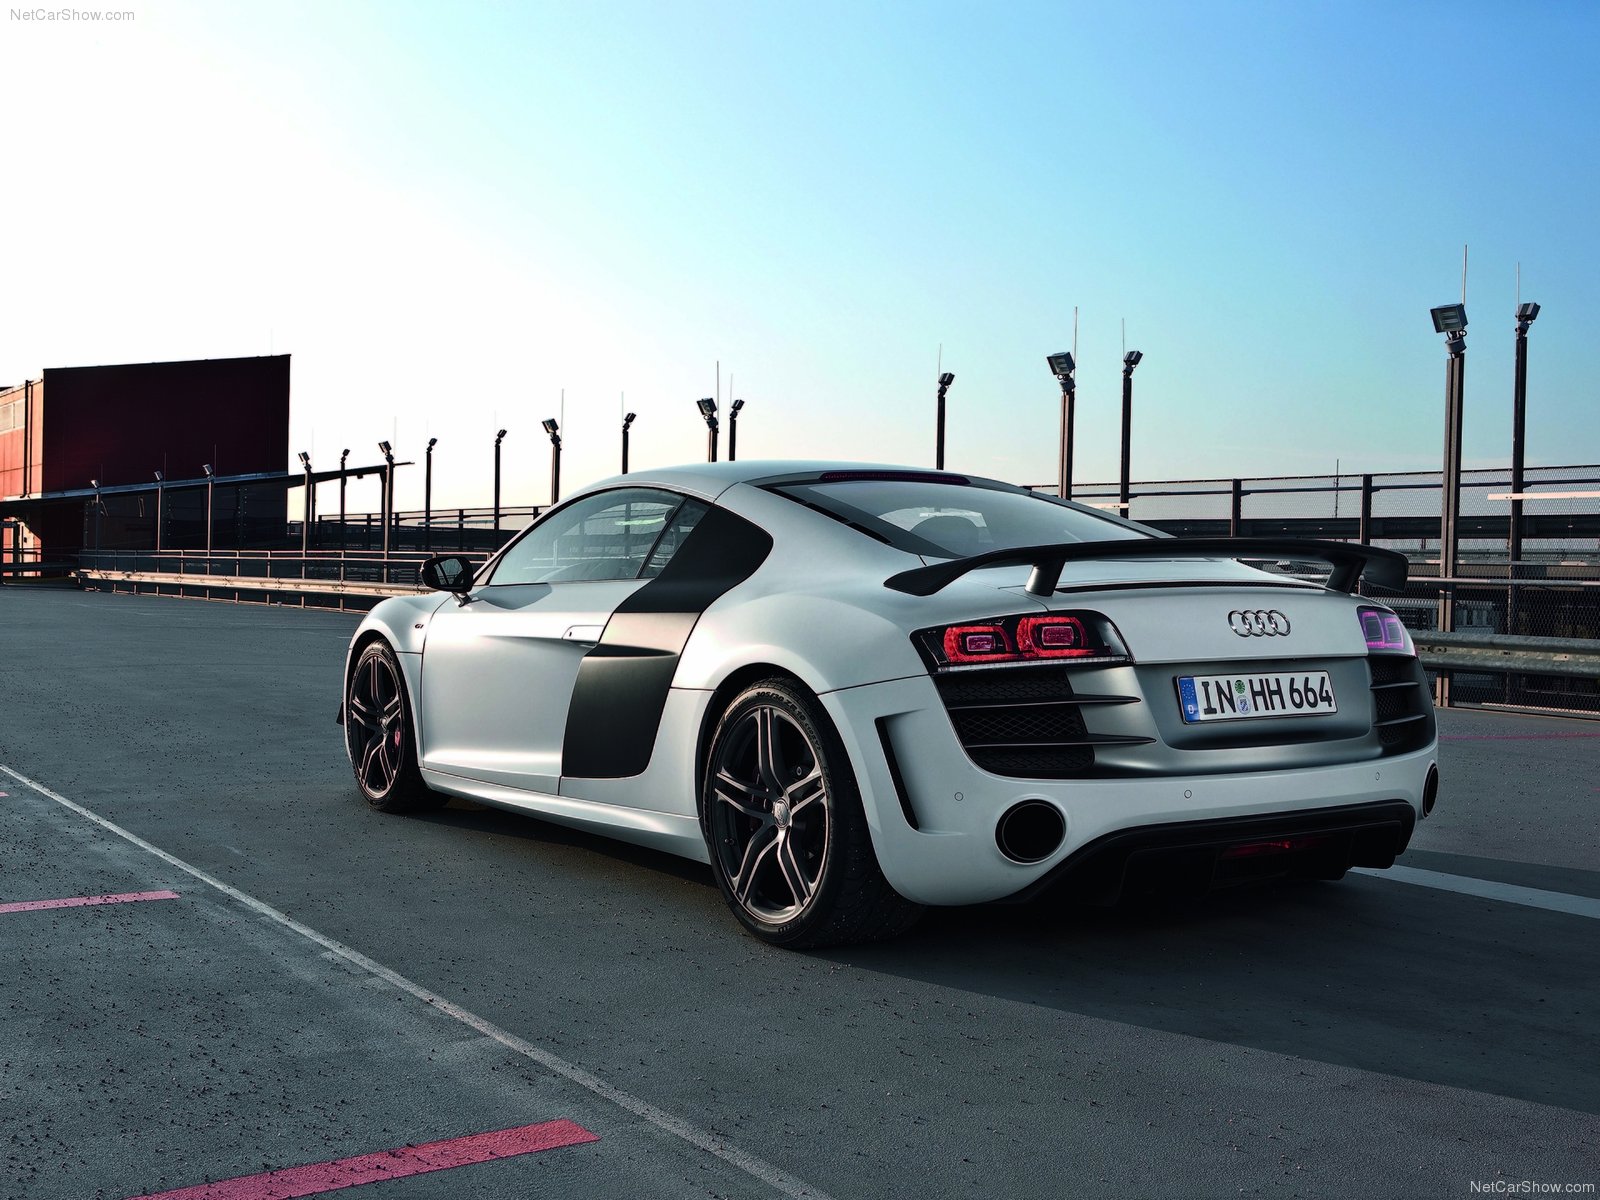 Audi R8 GT picture Audi photo gallery CarsBasecom